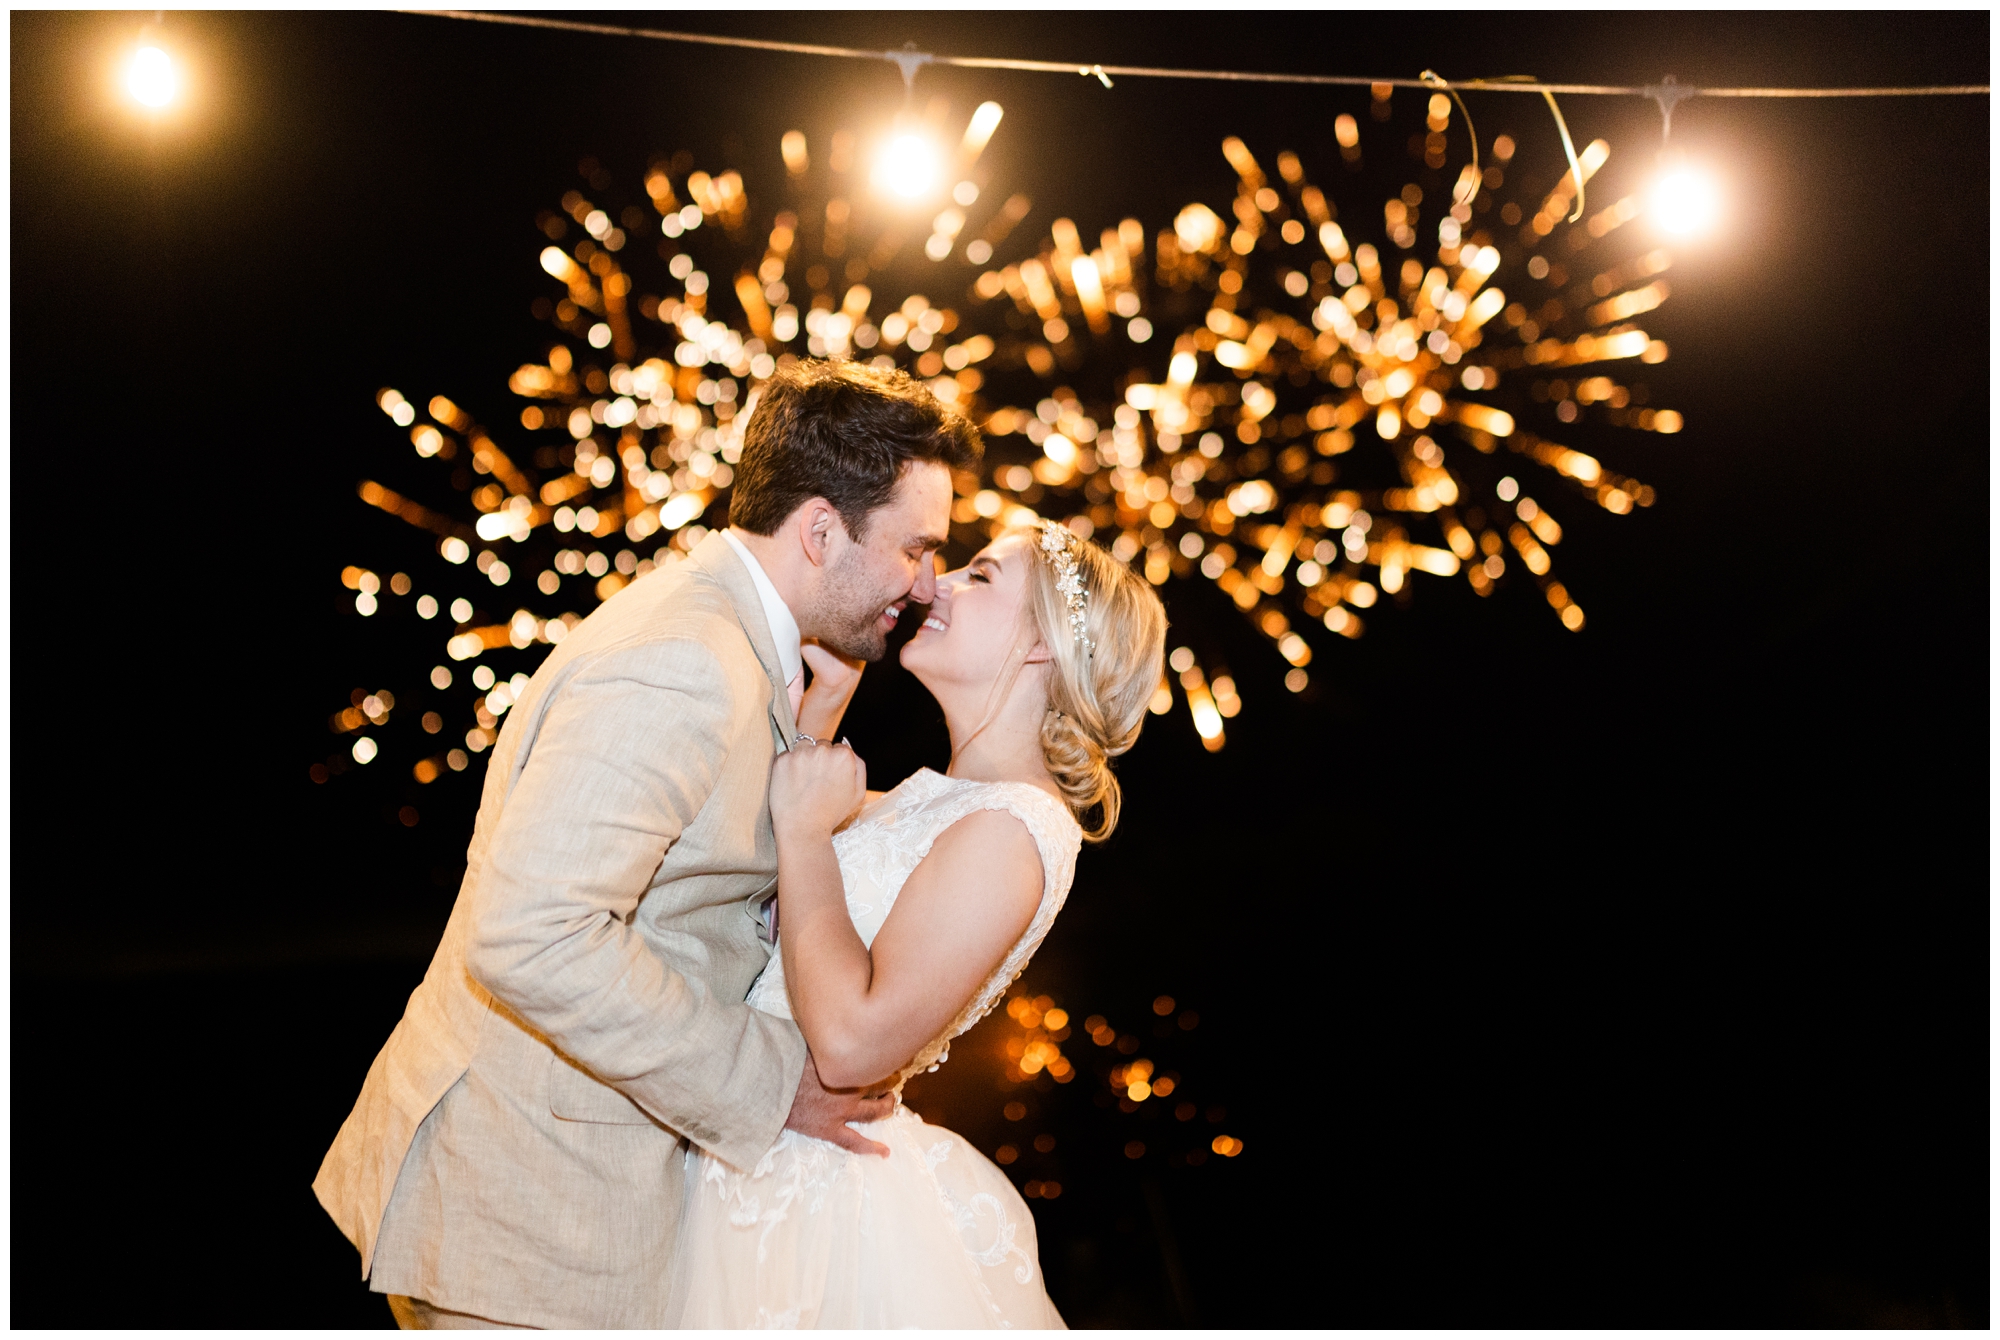 The bride and groom kiss in front of their private fireworks show. 